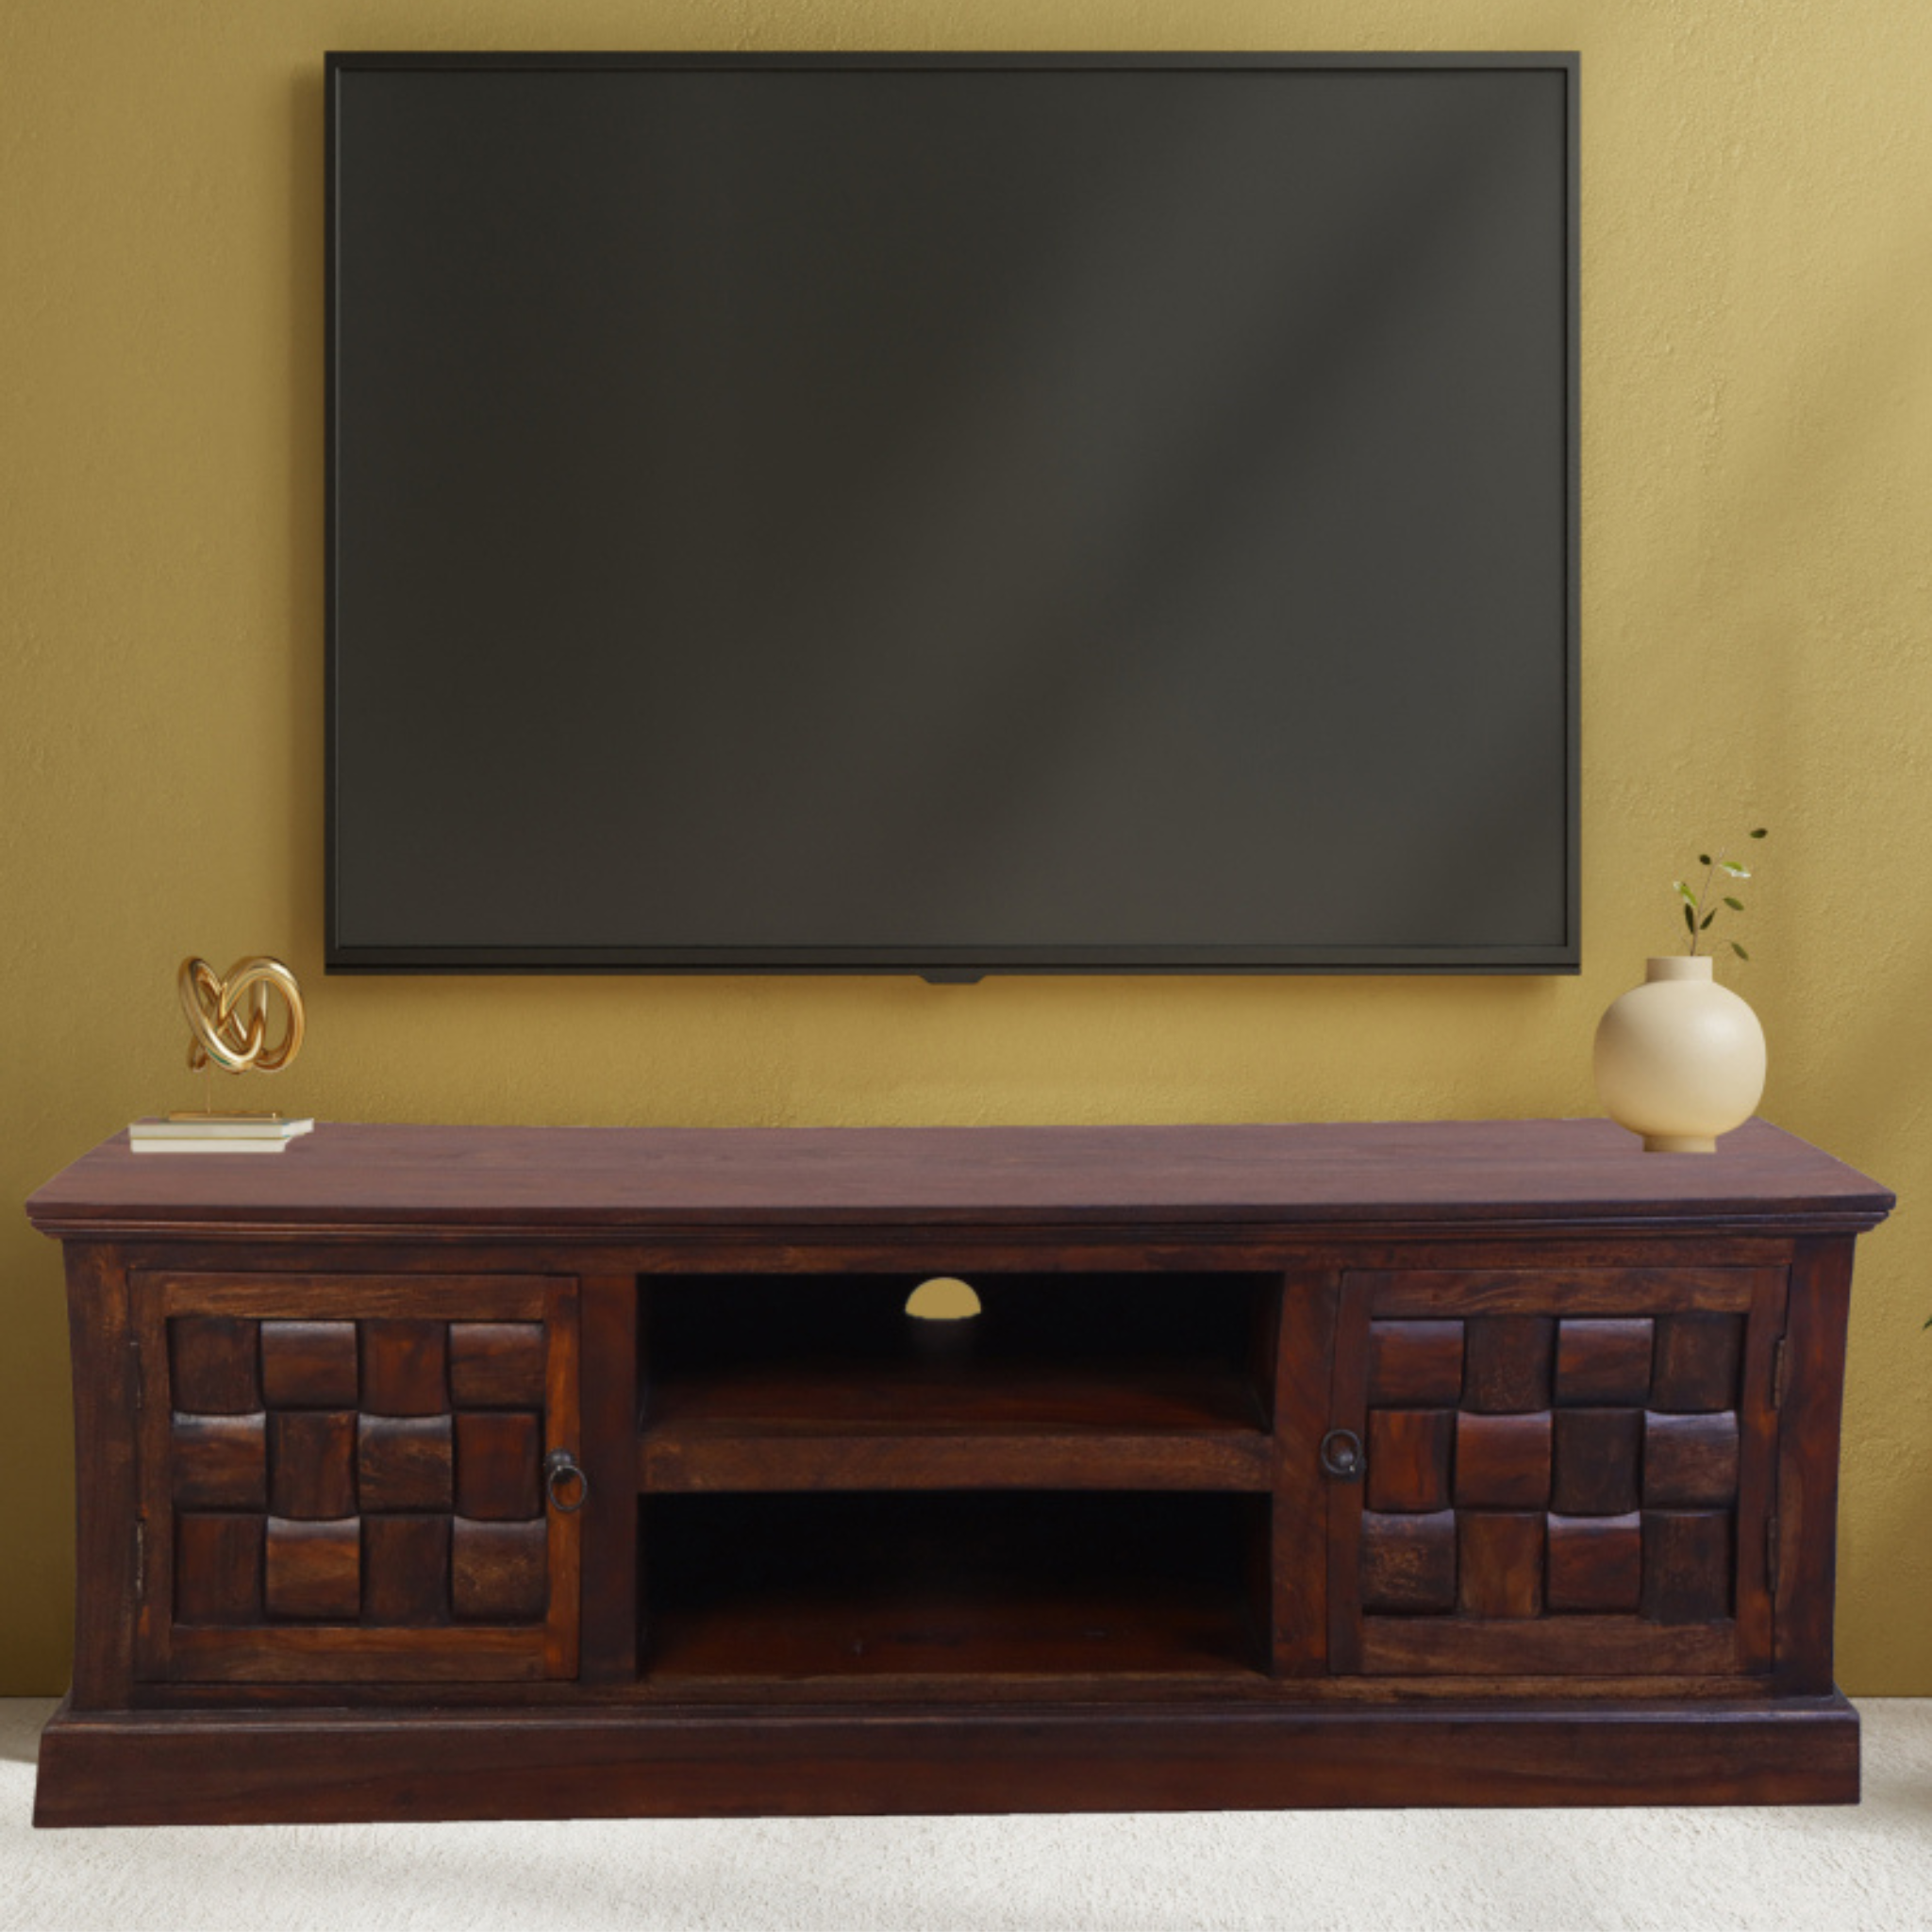 Nivaar TV Unit Free standing TV Unit with Cabinet Storage